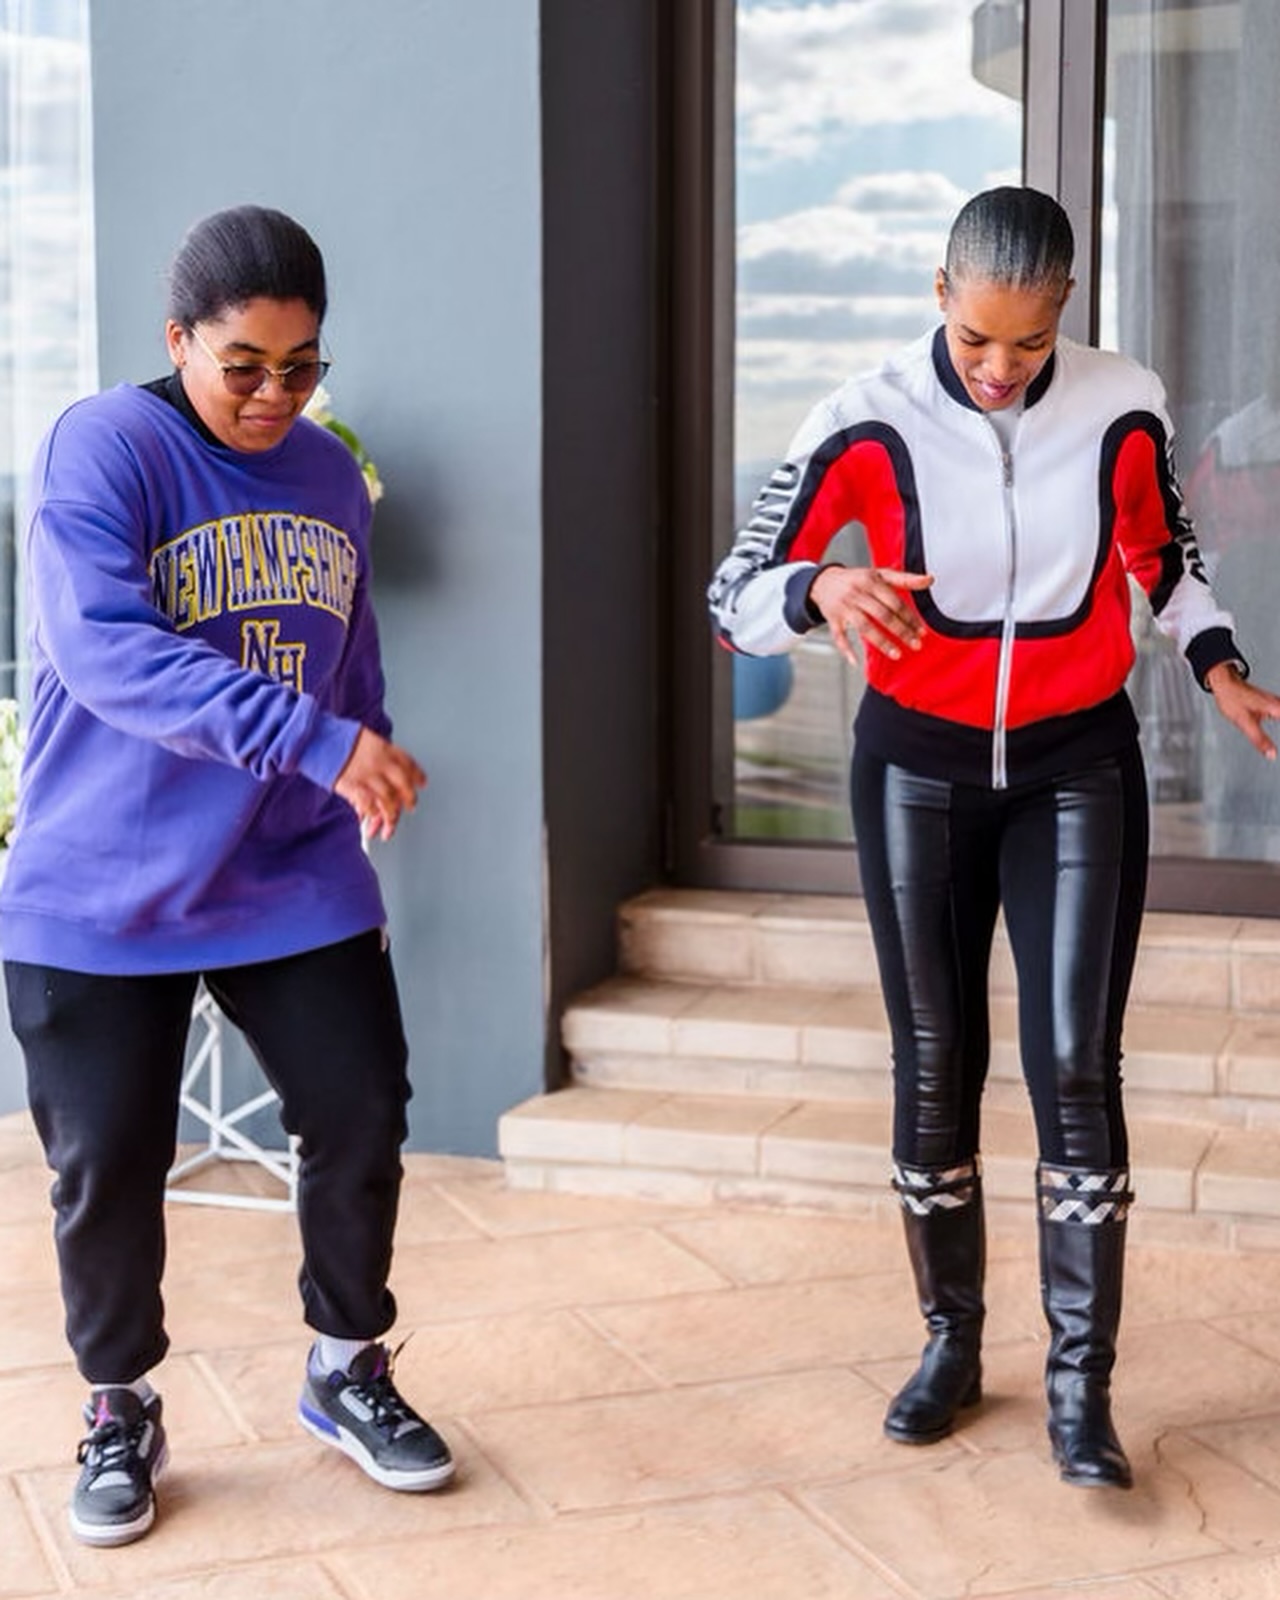 Connie Ferguson's sweetest birthday note to her 22-year-old daughter, Alicia